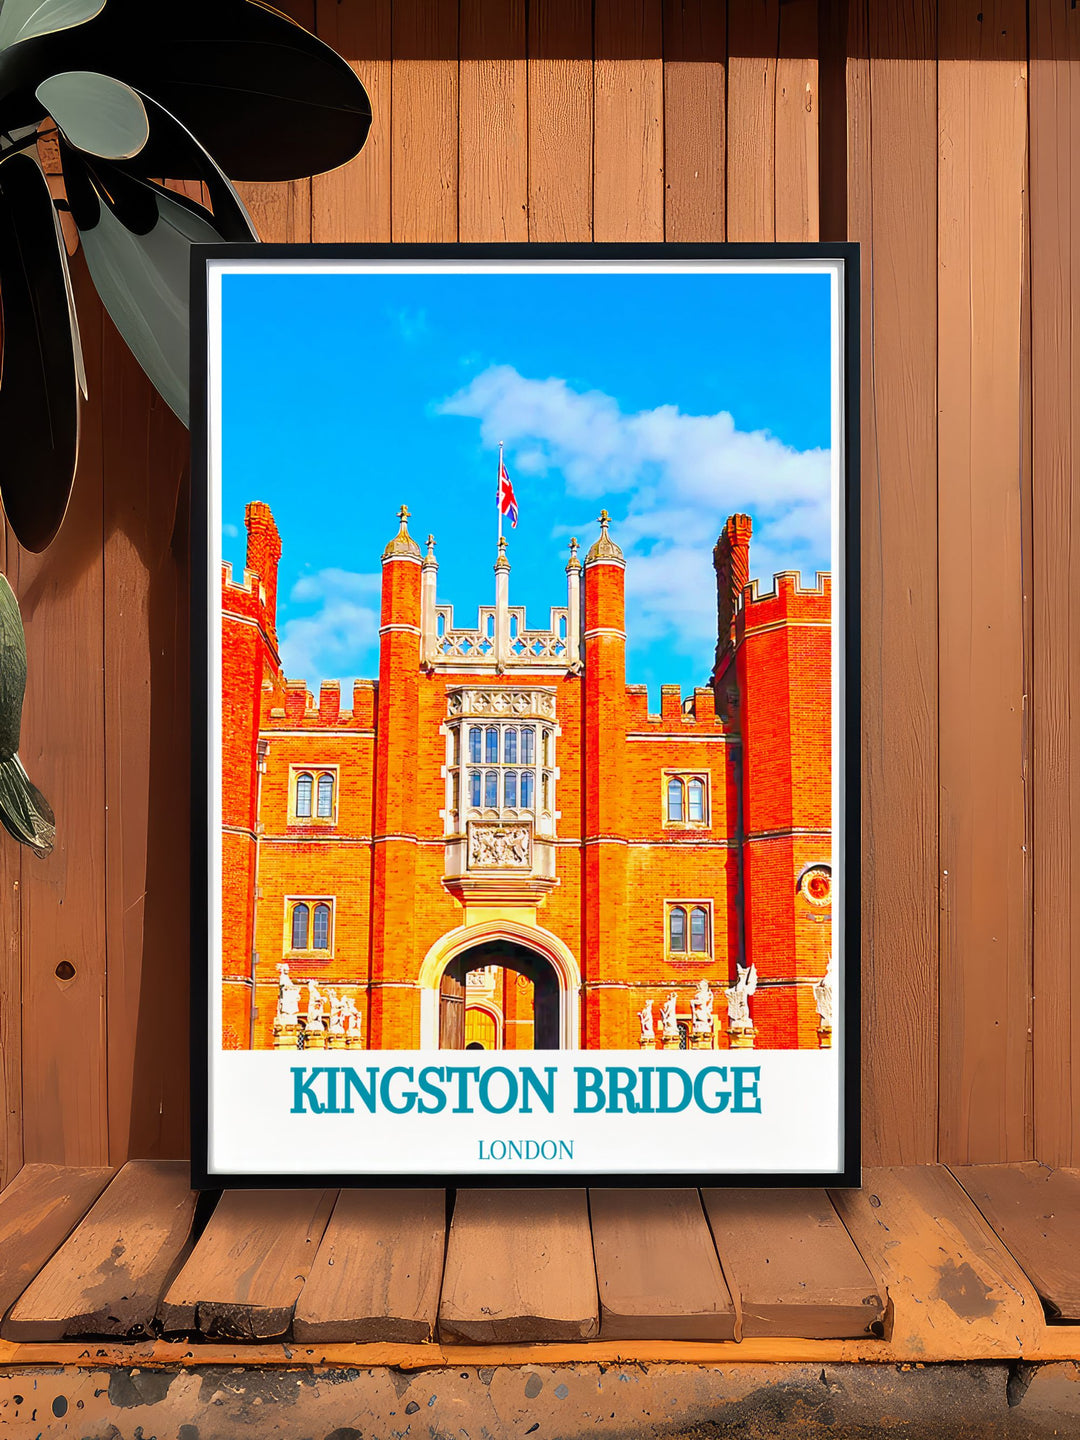 This travel poster of Kingston Bridge and Hampton Court highlights the rich history and architectural beauty of Londons significant structures, with a focus on their scenic surroundings.